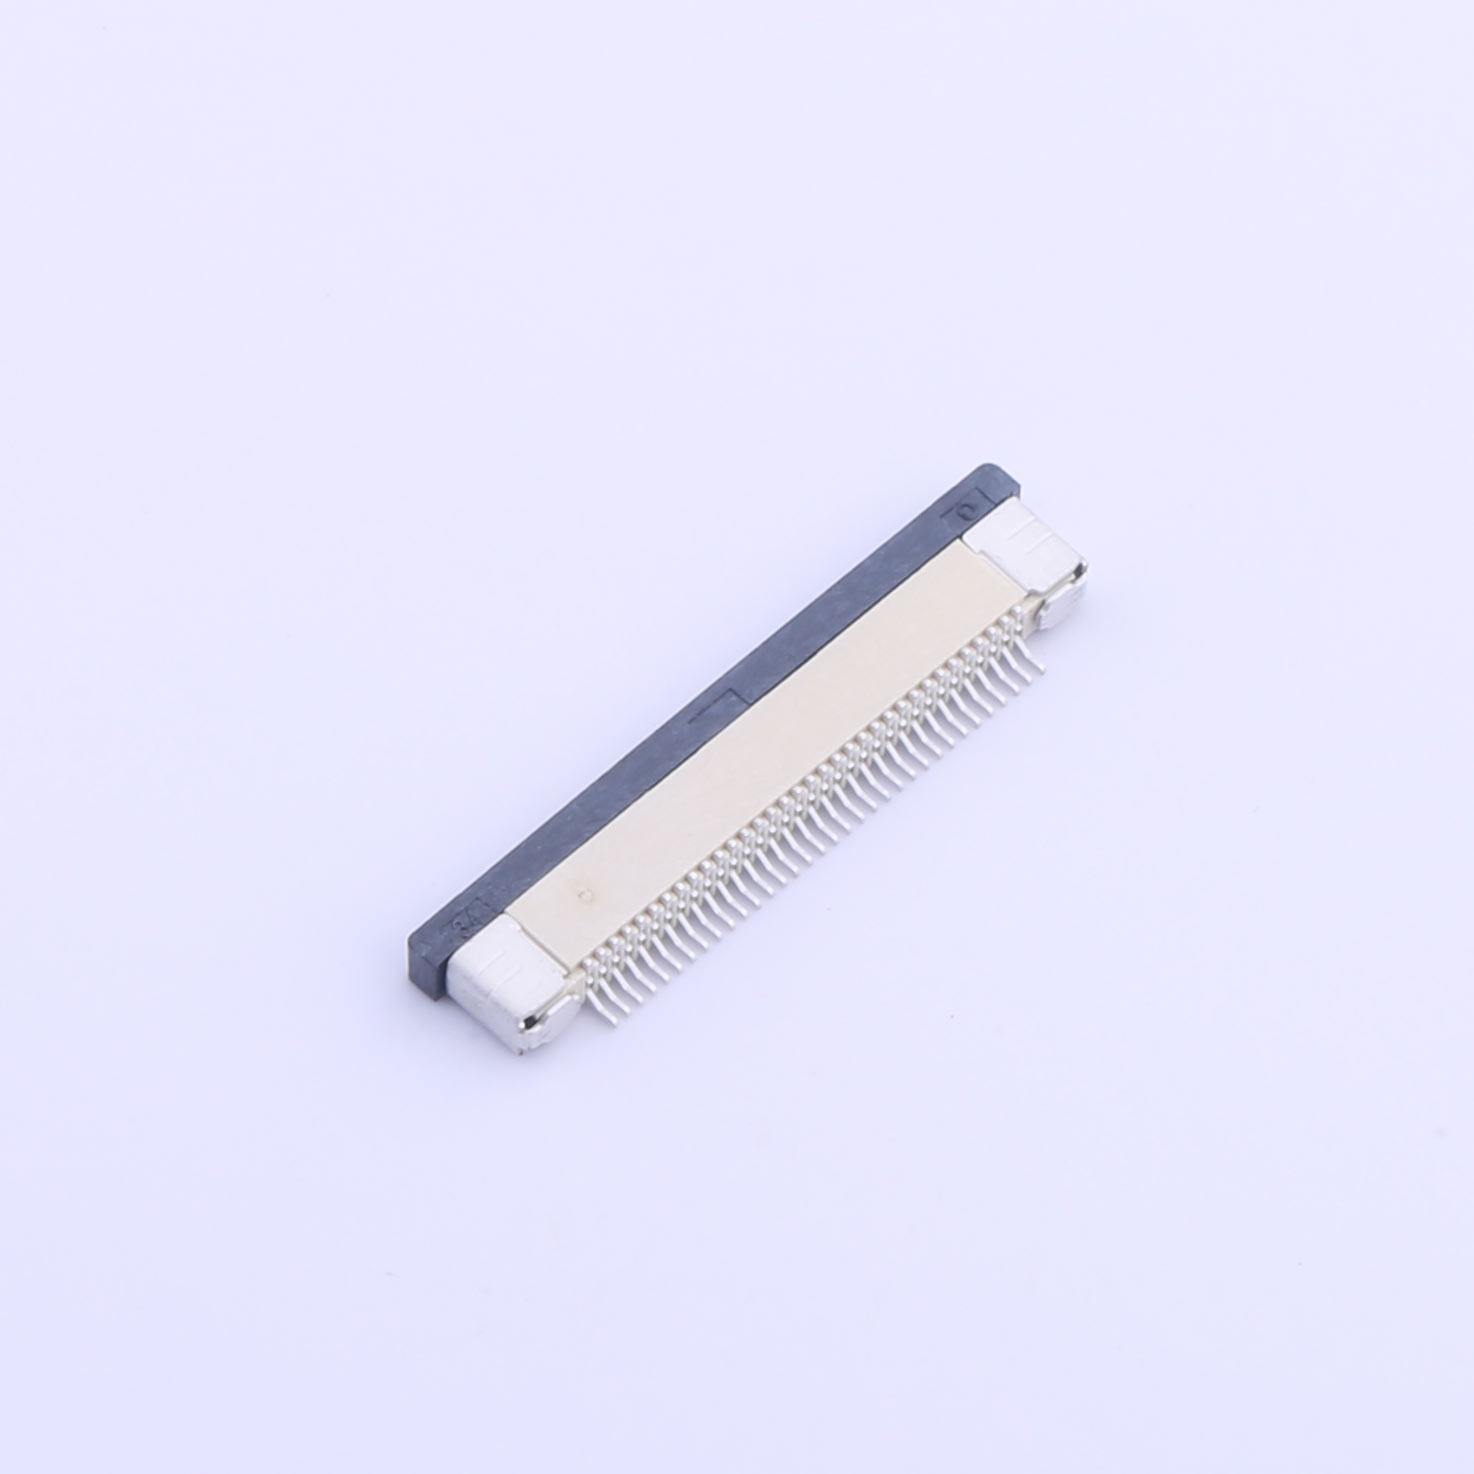 Kinghelm 0.5mm Pitch FPC FFC Connector 34P Height 2mm Drawer type lower connection Contact SMT FPC Connector